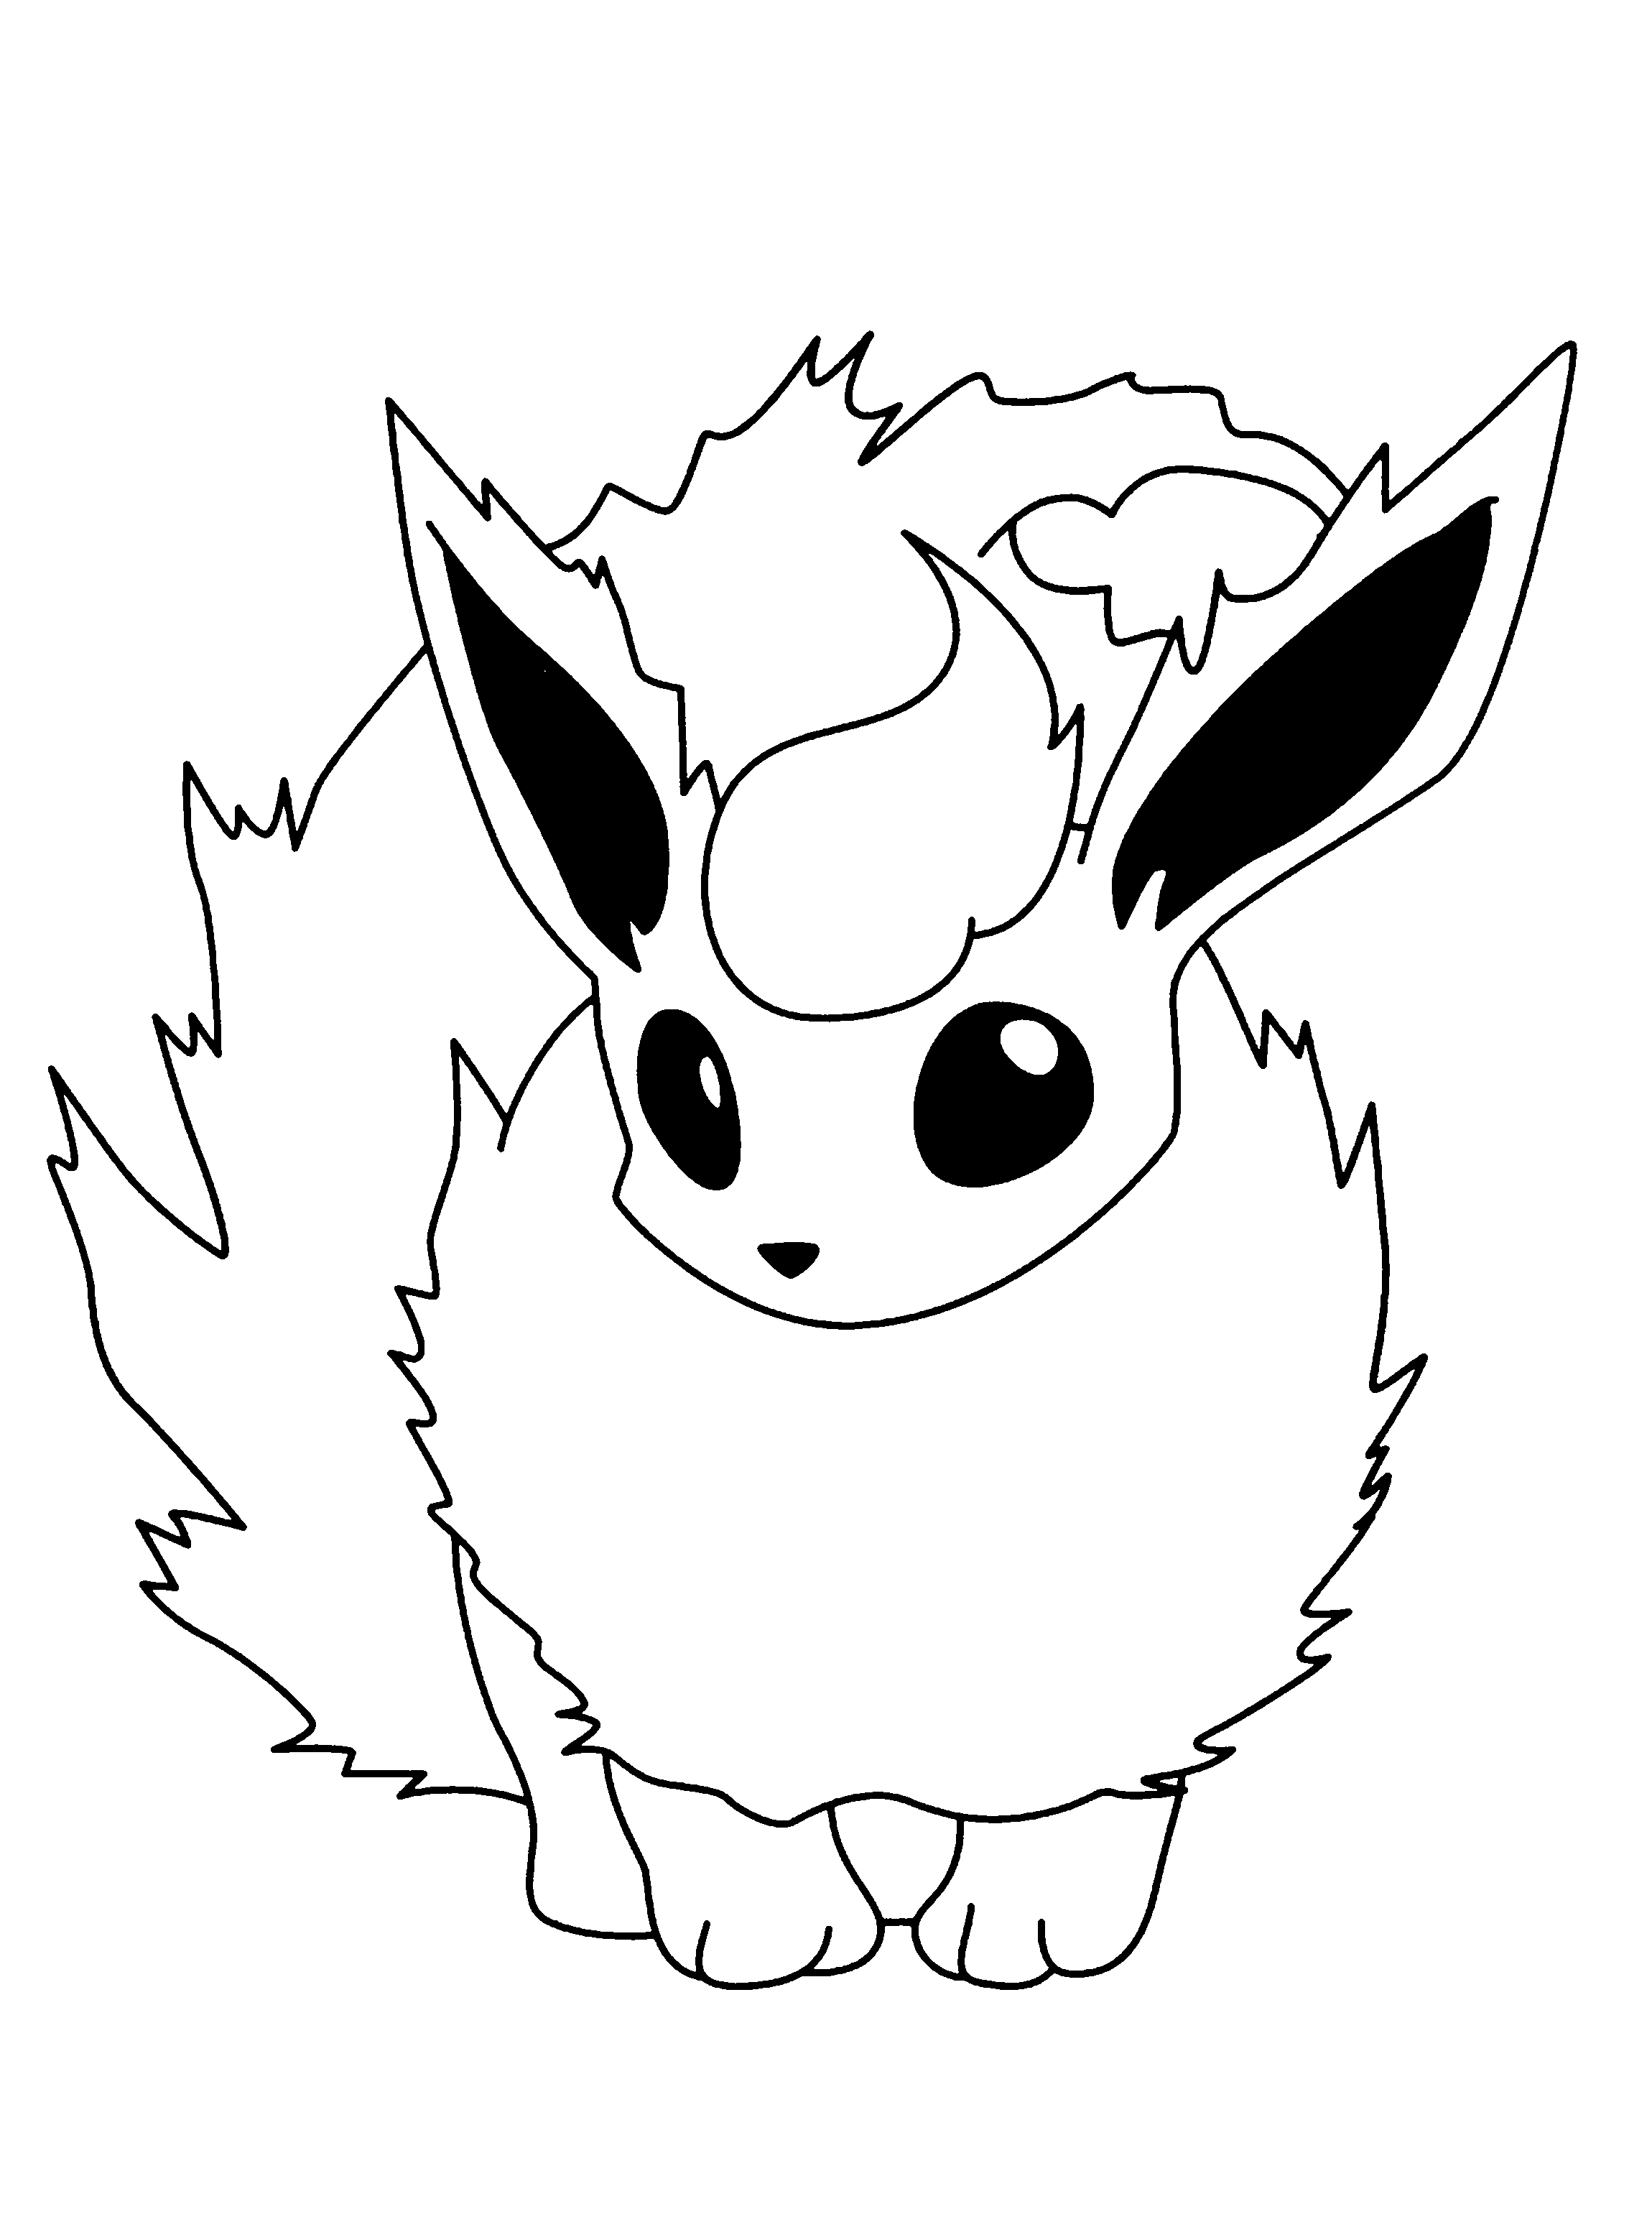 Eevee Pokemon Coloring Pages - Coloring Home